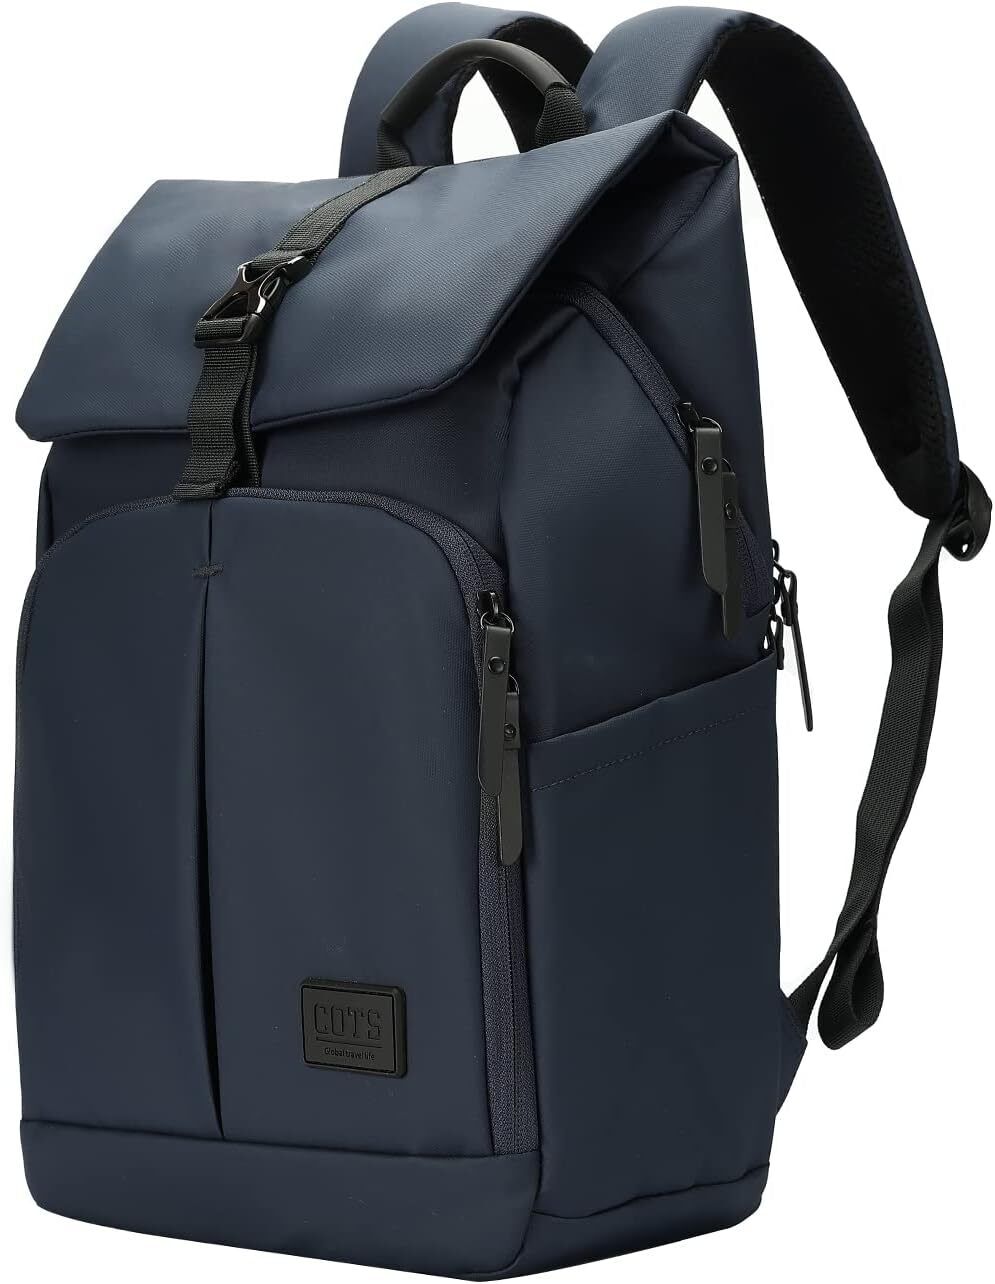 COTS Laptop Backpack for Work, Unisex Business Travel Fits 15.6 Blue 